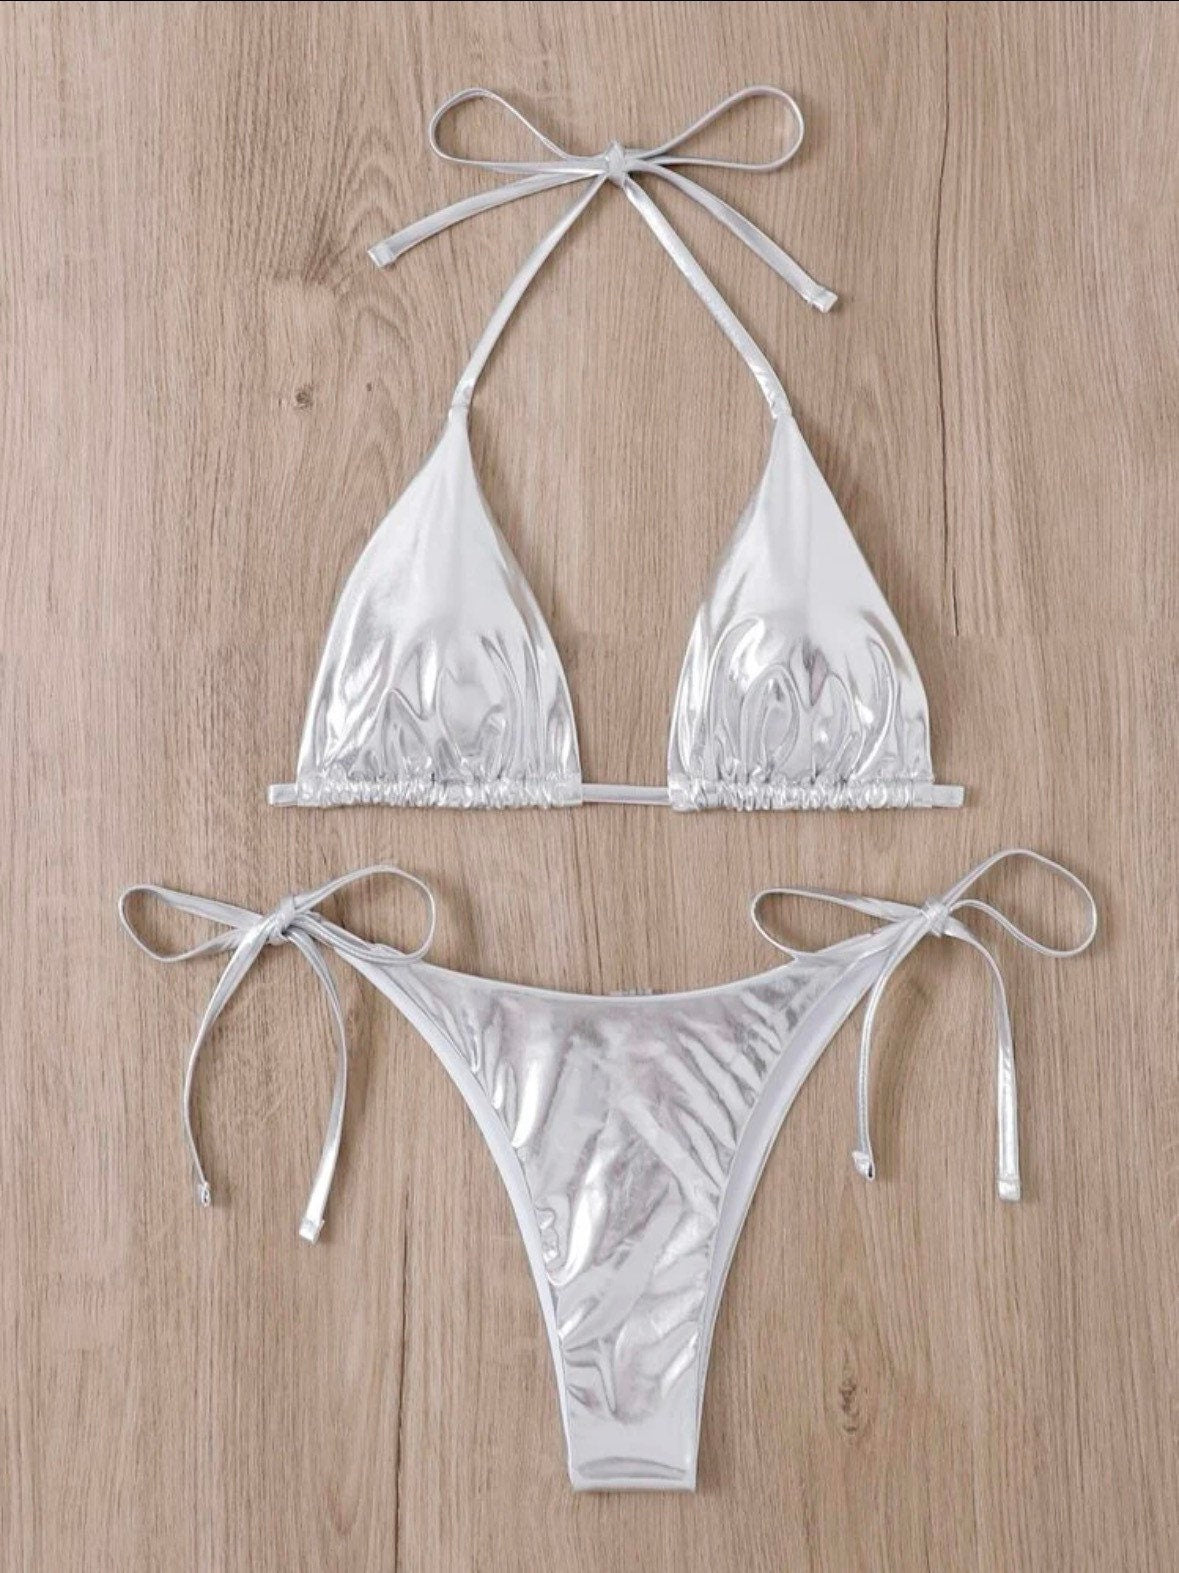 The Metallic silver swim bikini with tie sides and solid metallic silver print triangle halter top tie and bottoms swimsuit set